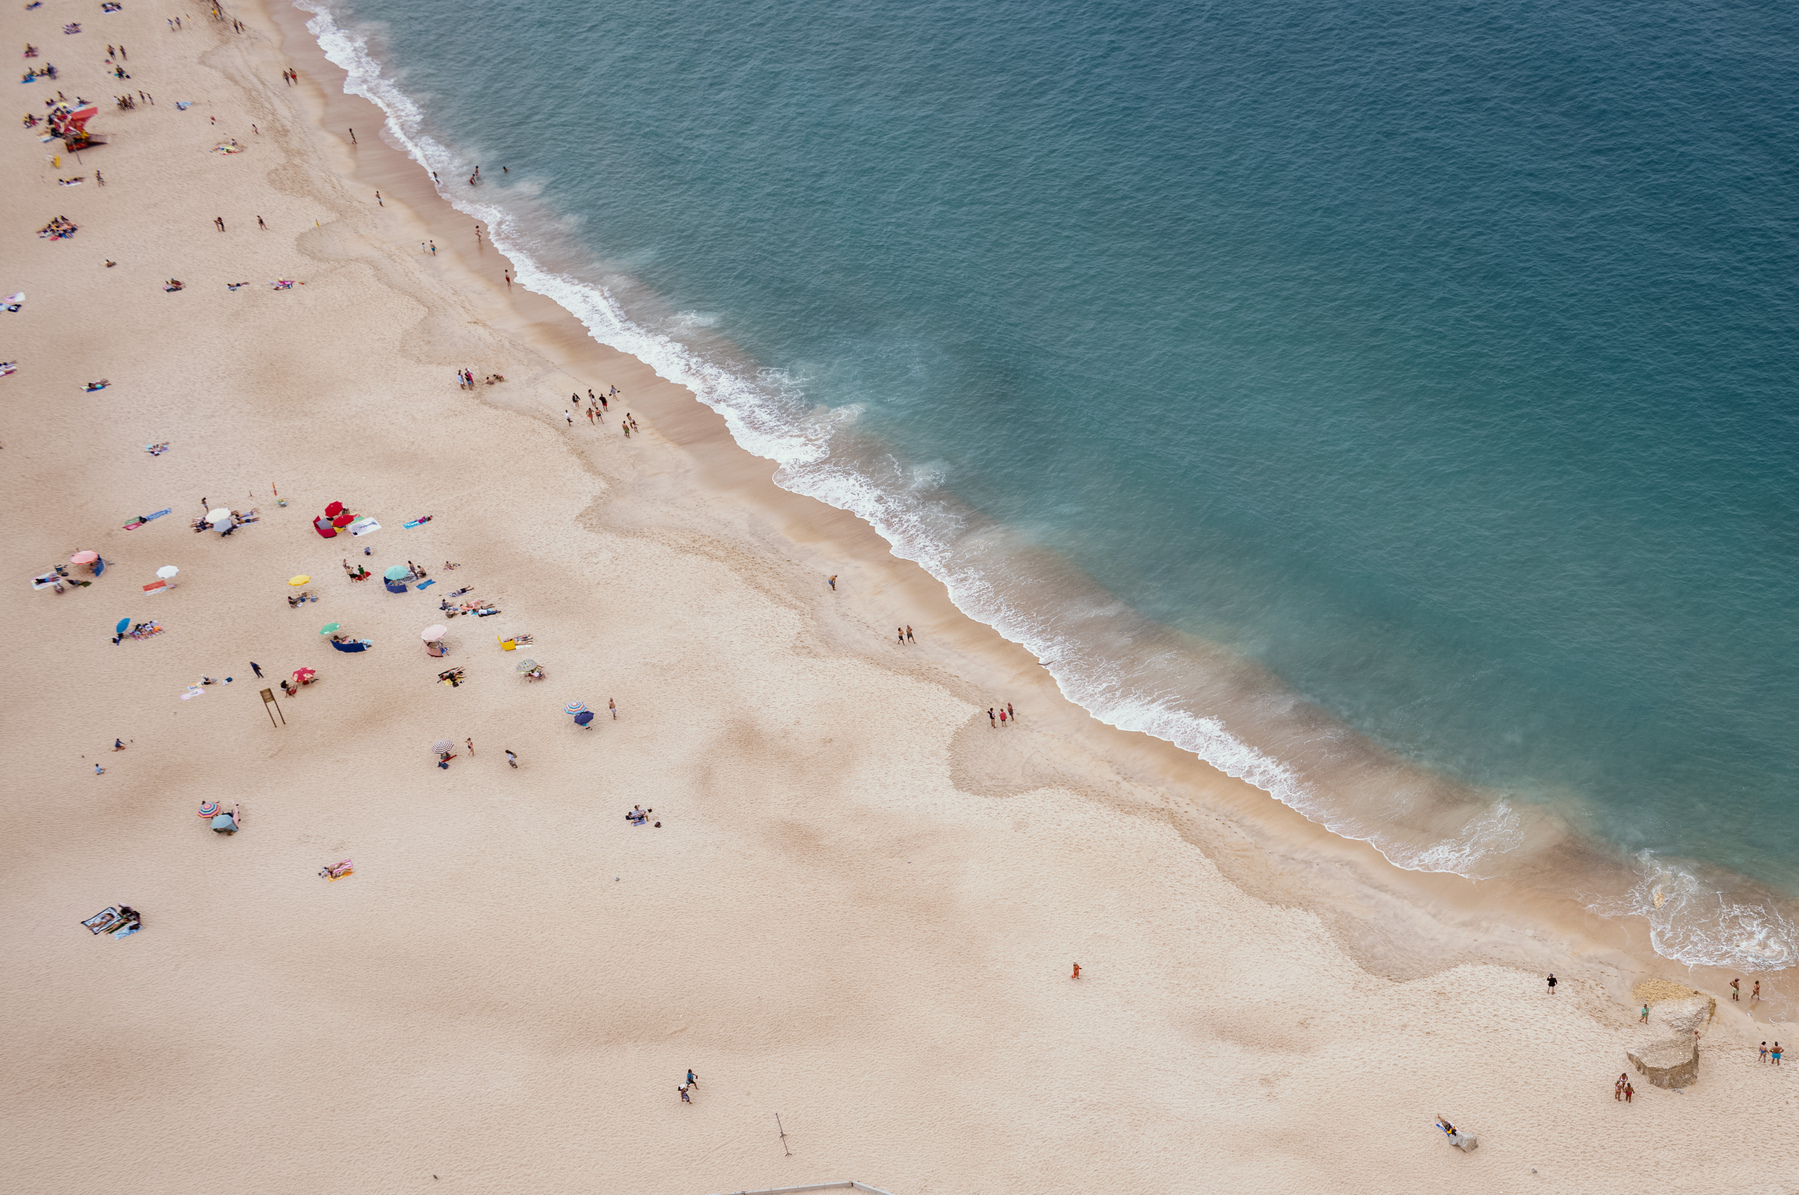 People on a beach, photographed from the top